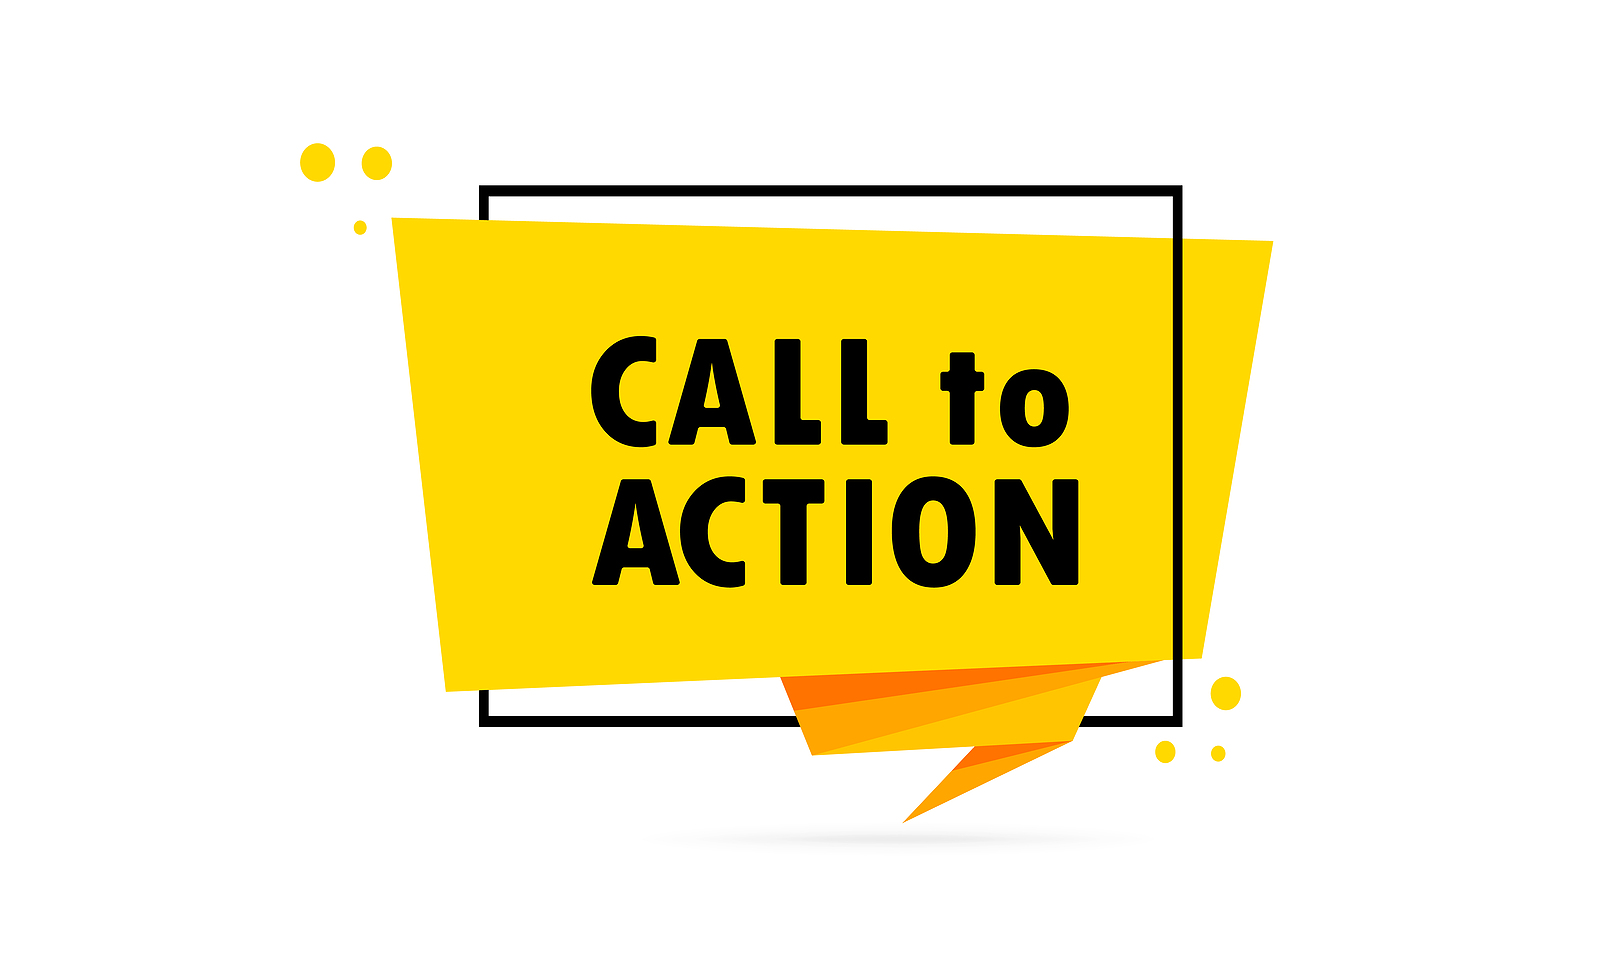 A Call to Action banner on a yellow background within a black frame.